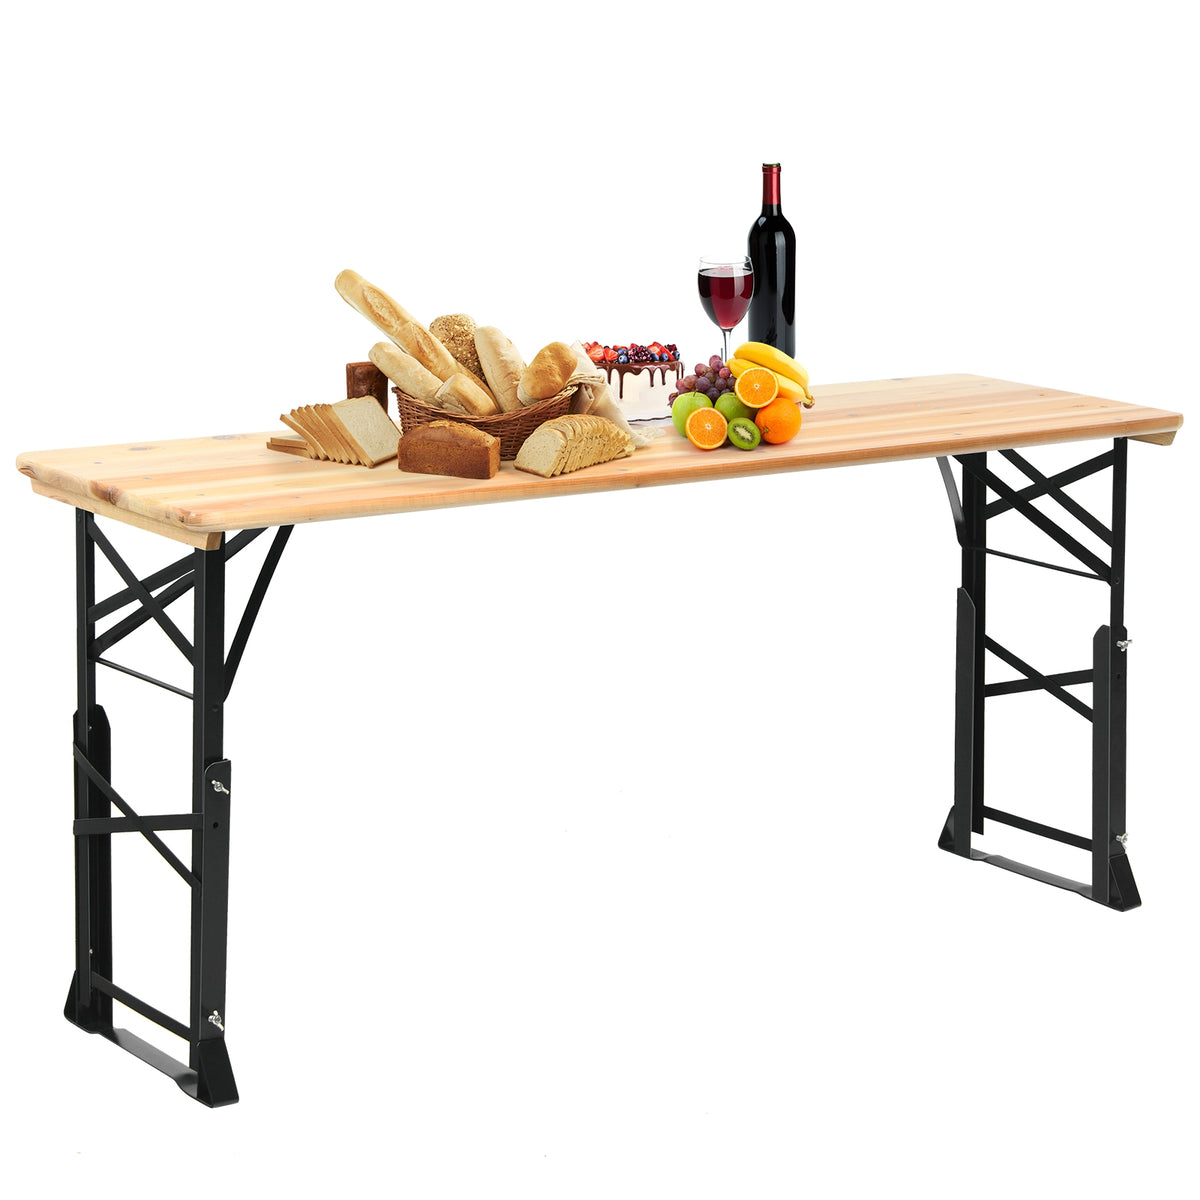 66.5 Inch Outdoor Wood Folding Picnic Table with Adjustable Heights